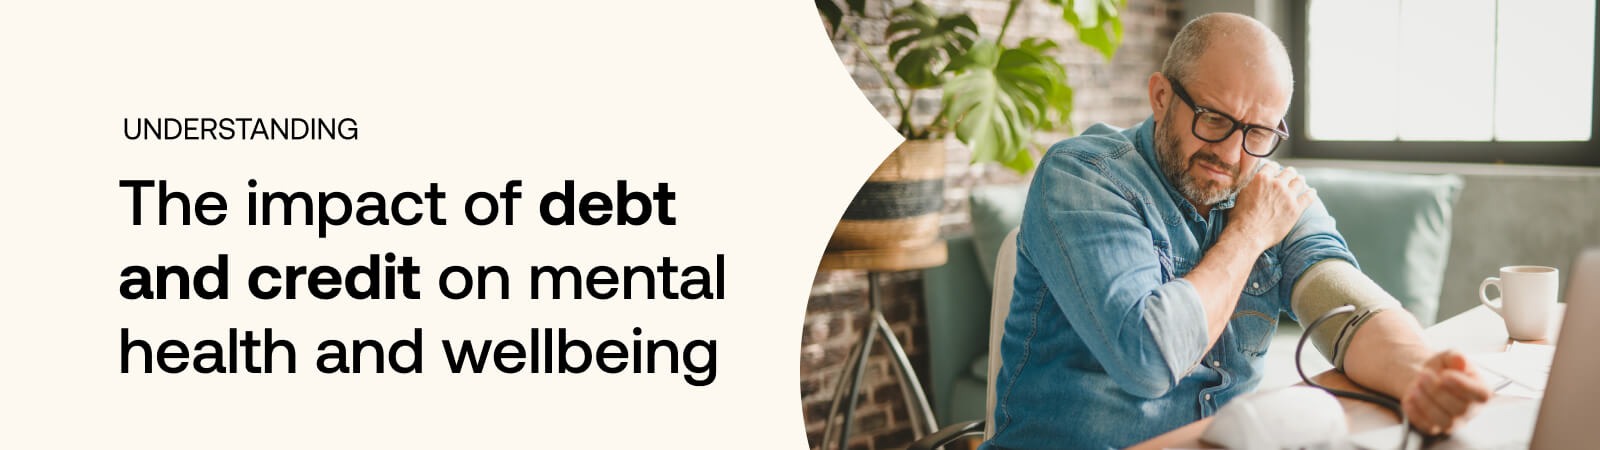 the impact of debt and credit on wellbeing